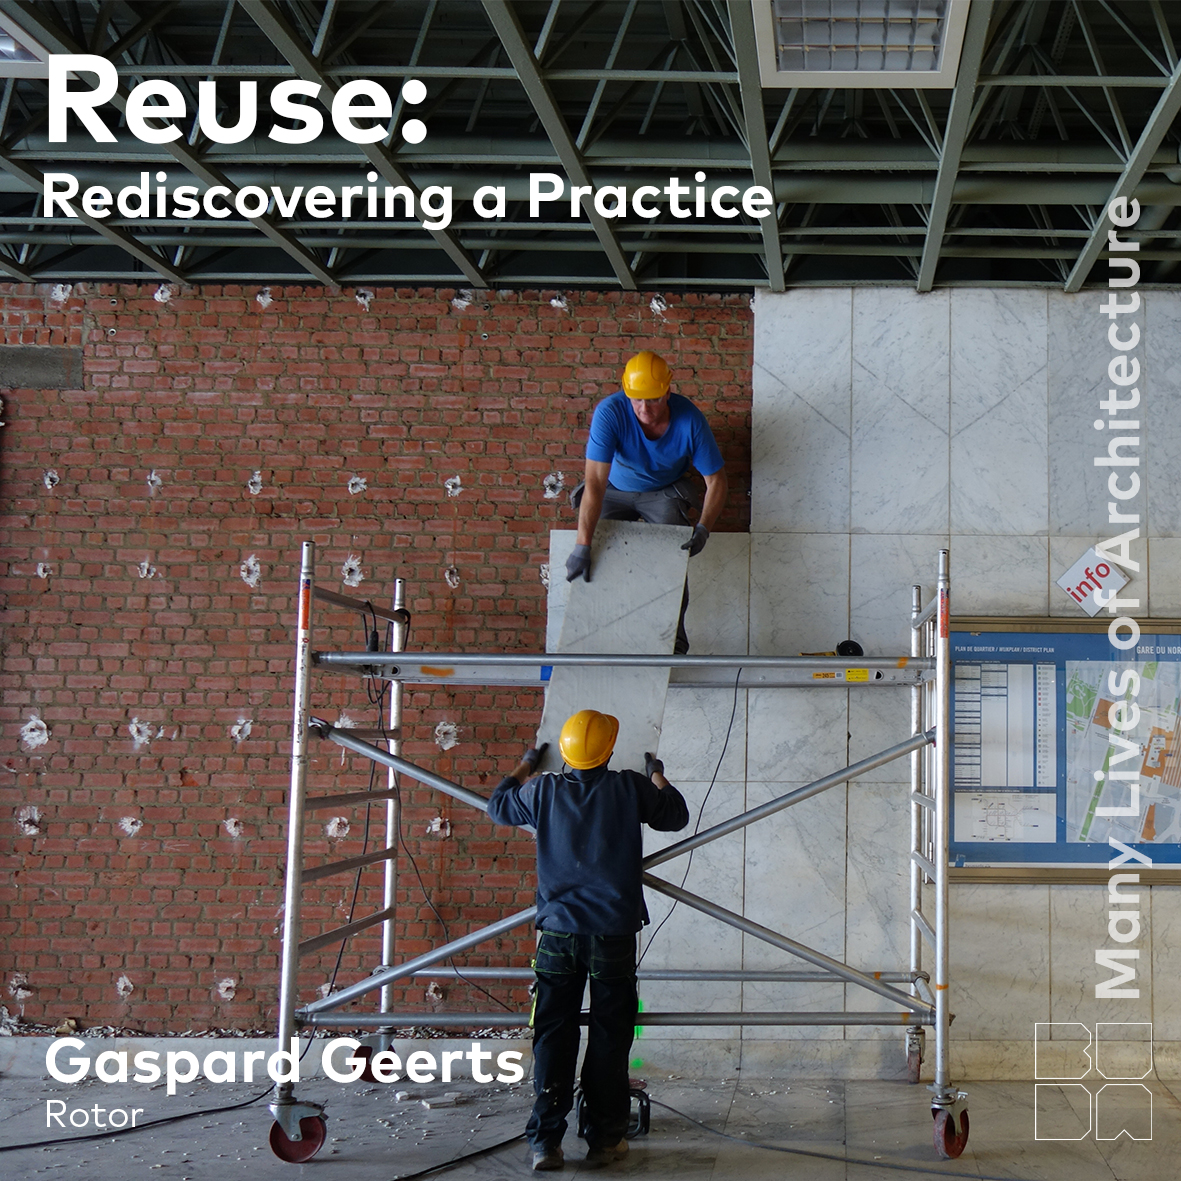 Reuse: Rediscovering a Practice